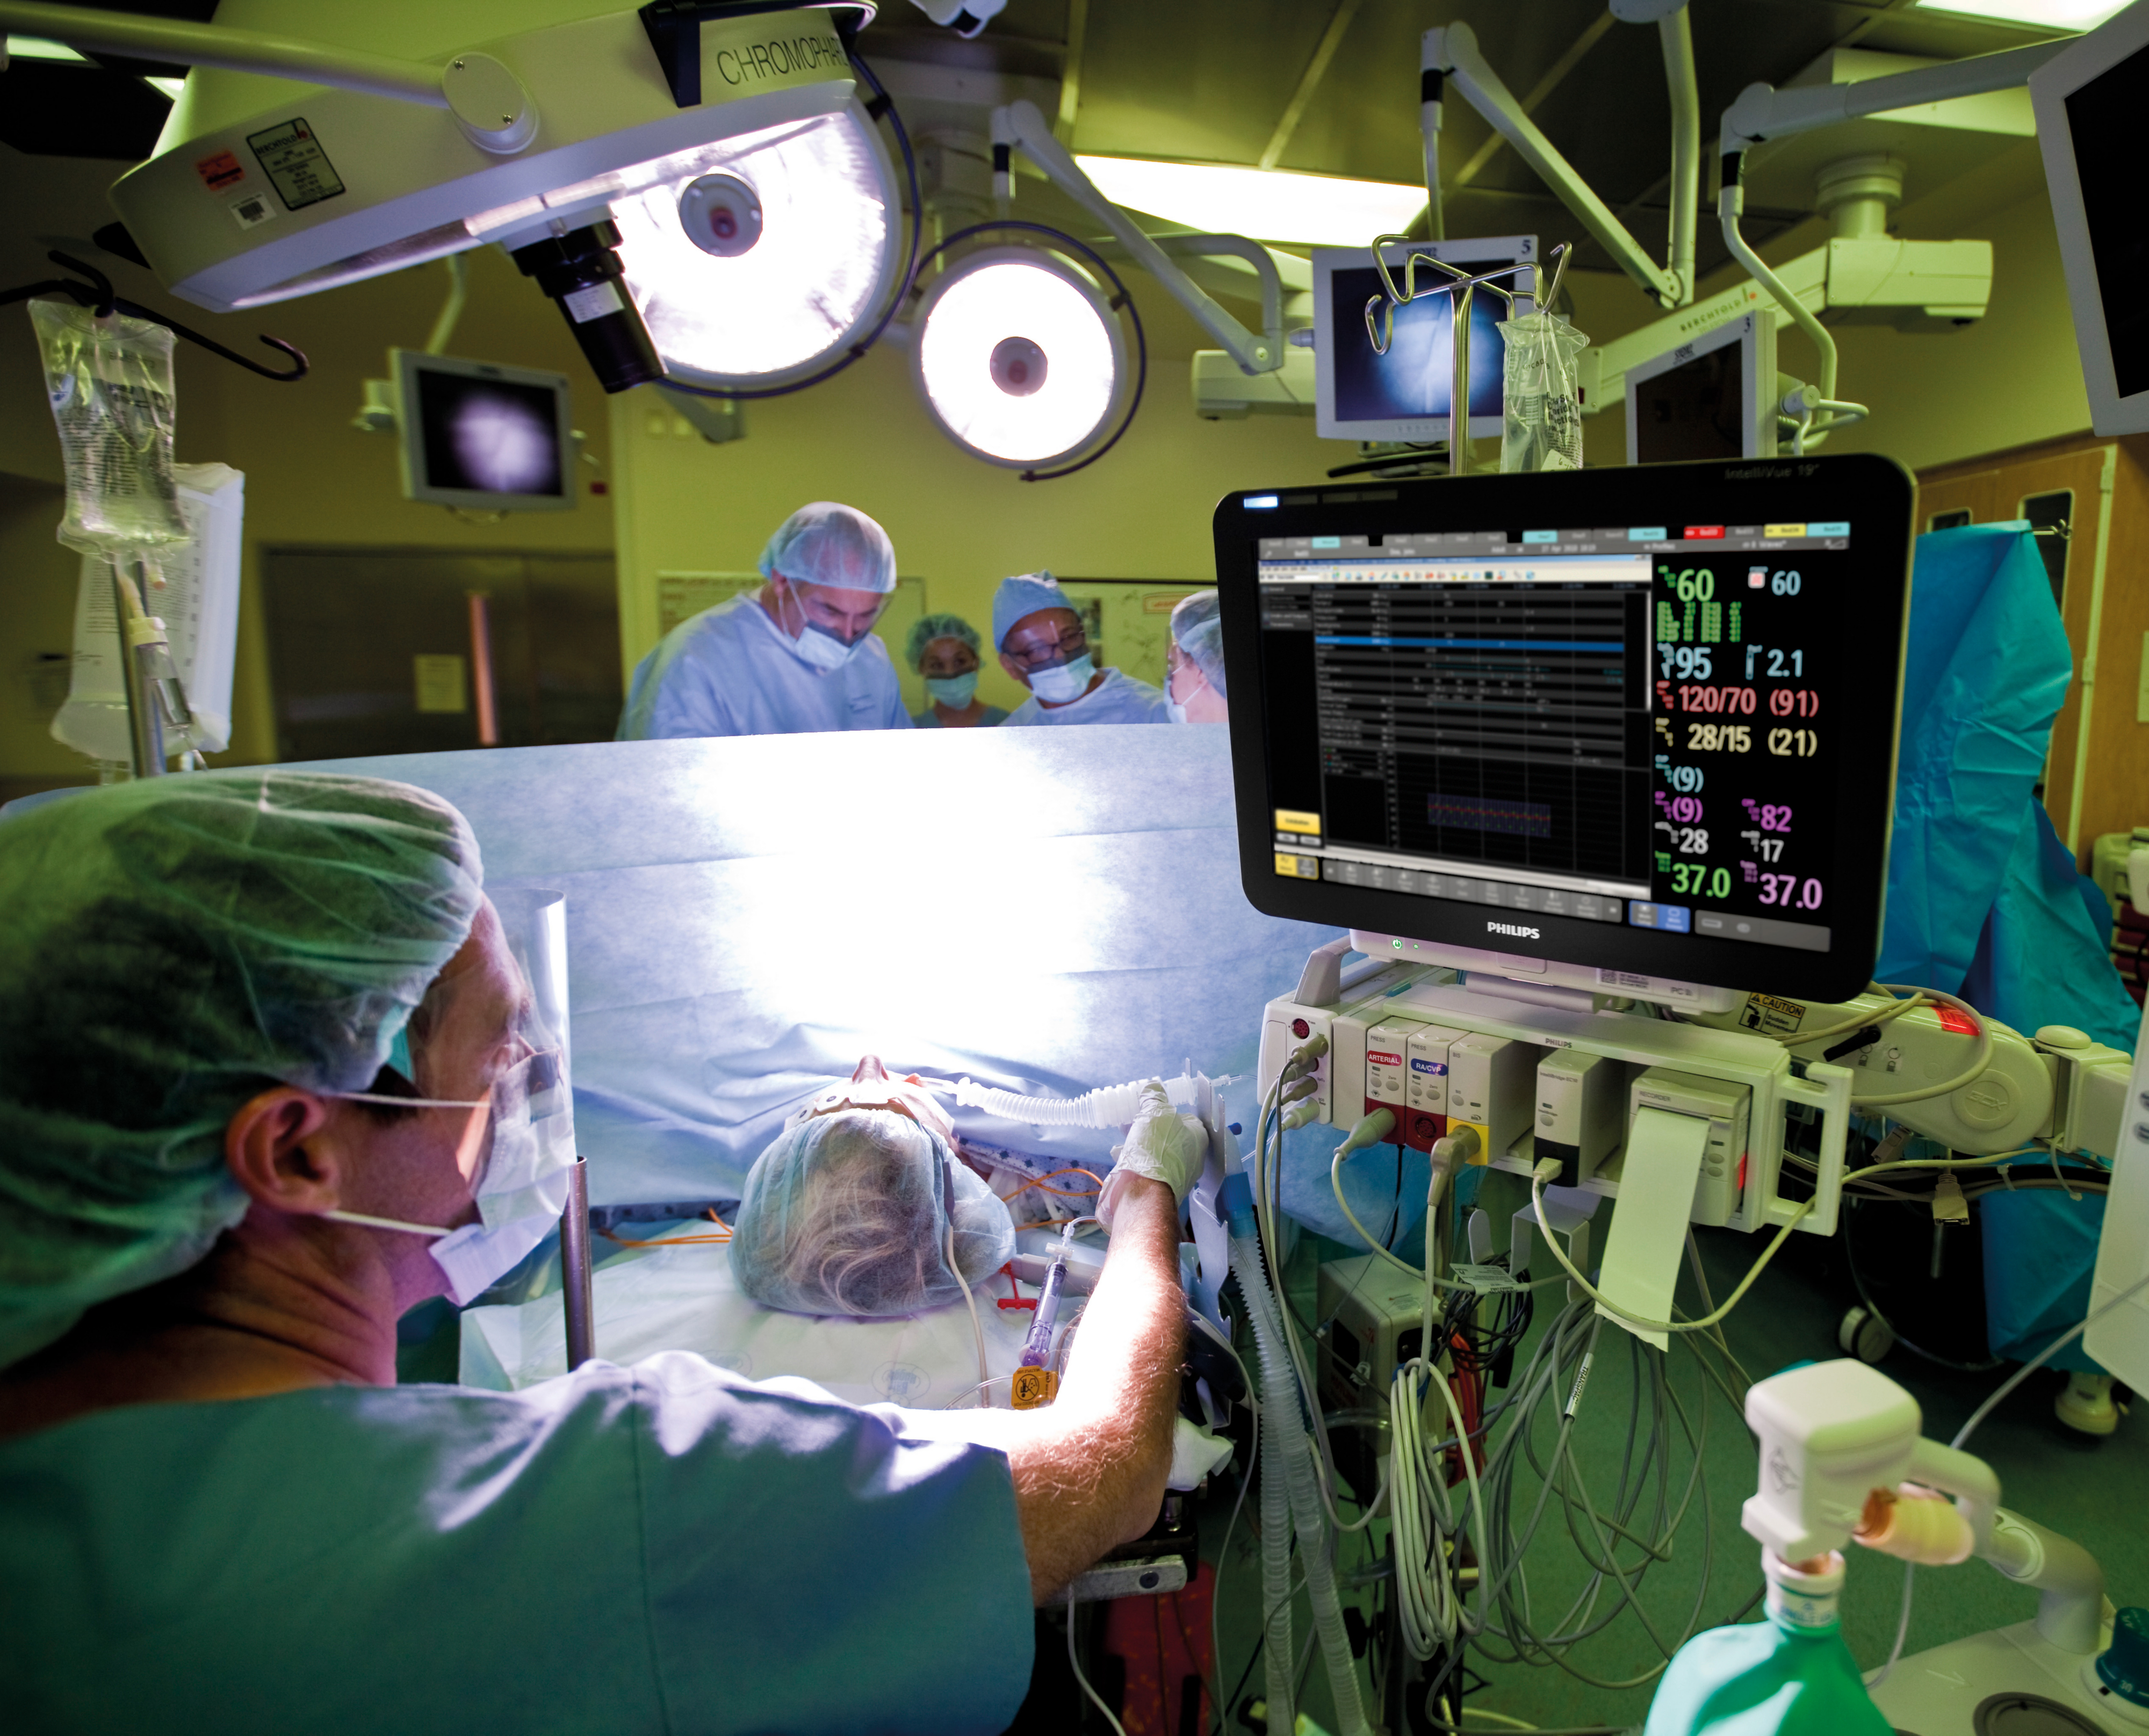 IntelliSpace Critical Care and Anesthesia (ICCA)